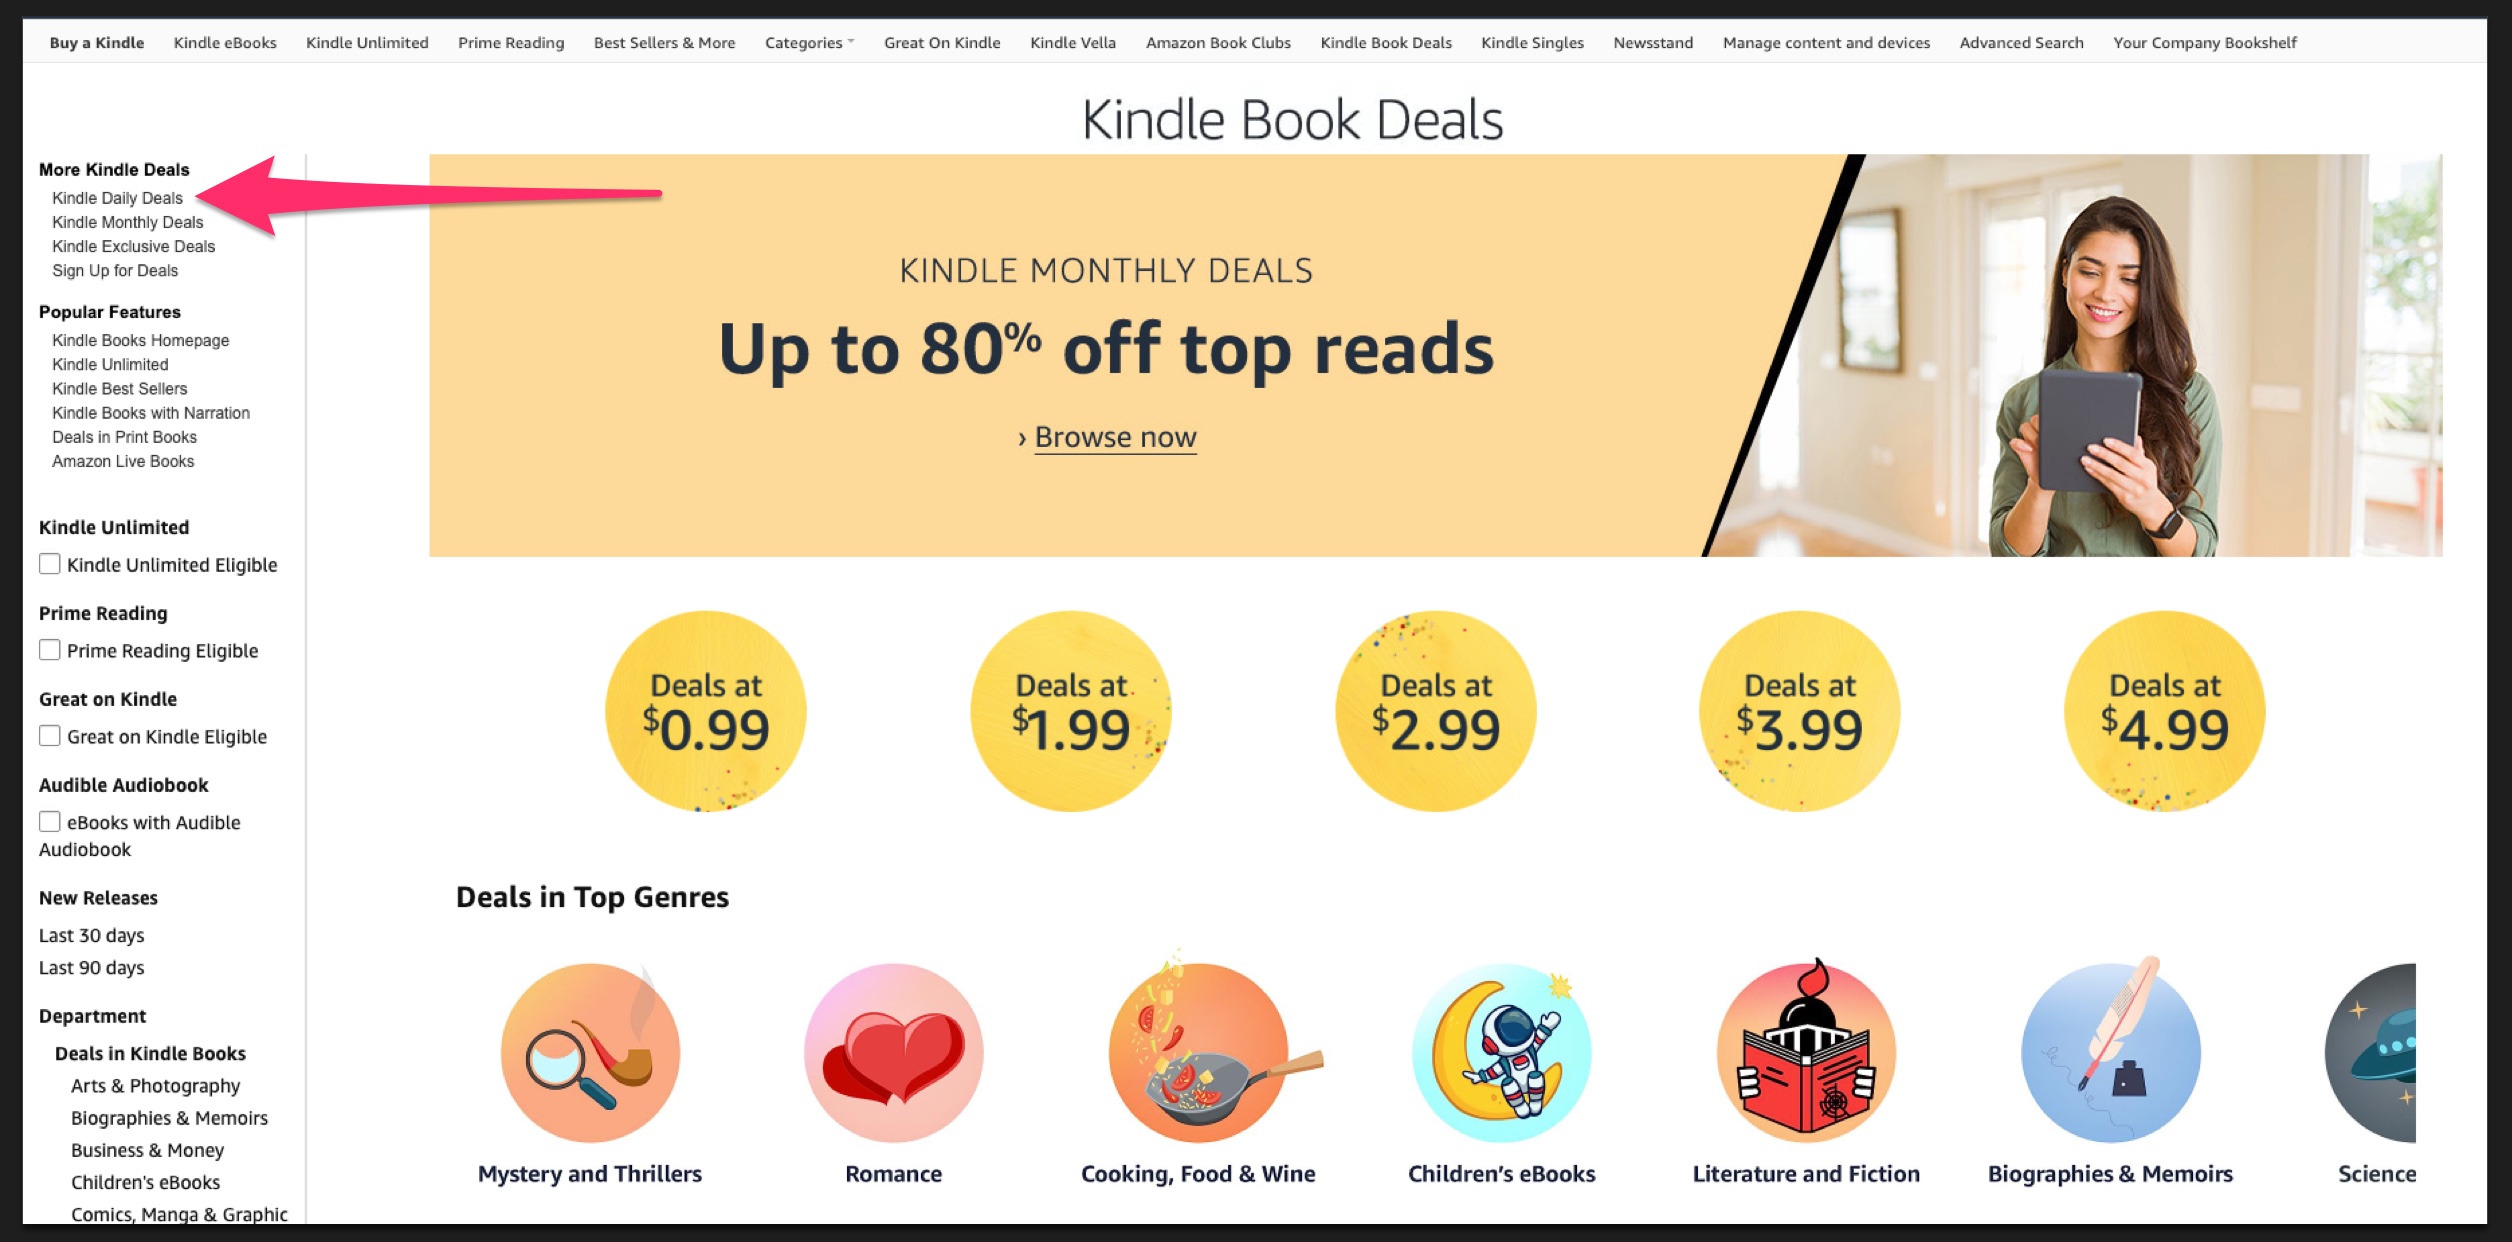 How to Find Kindle Daily Deals - Step 5